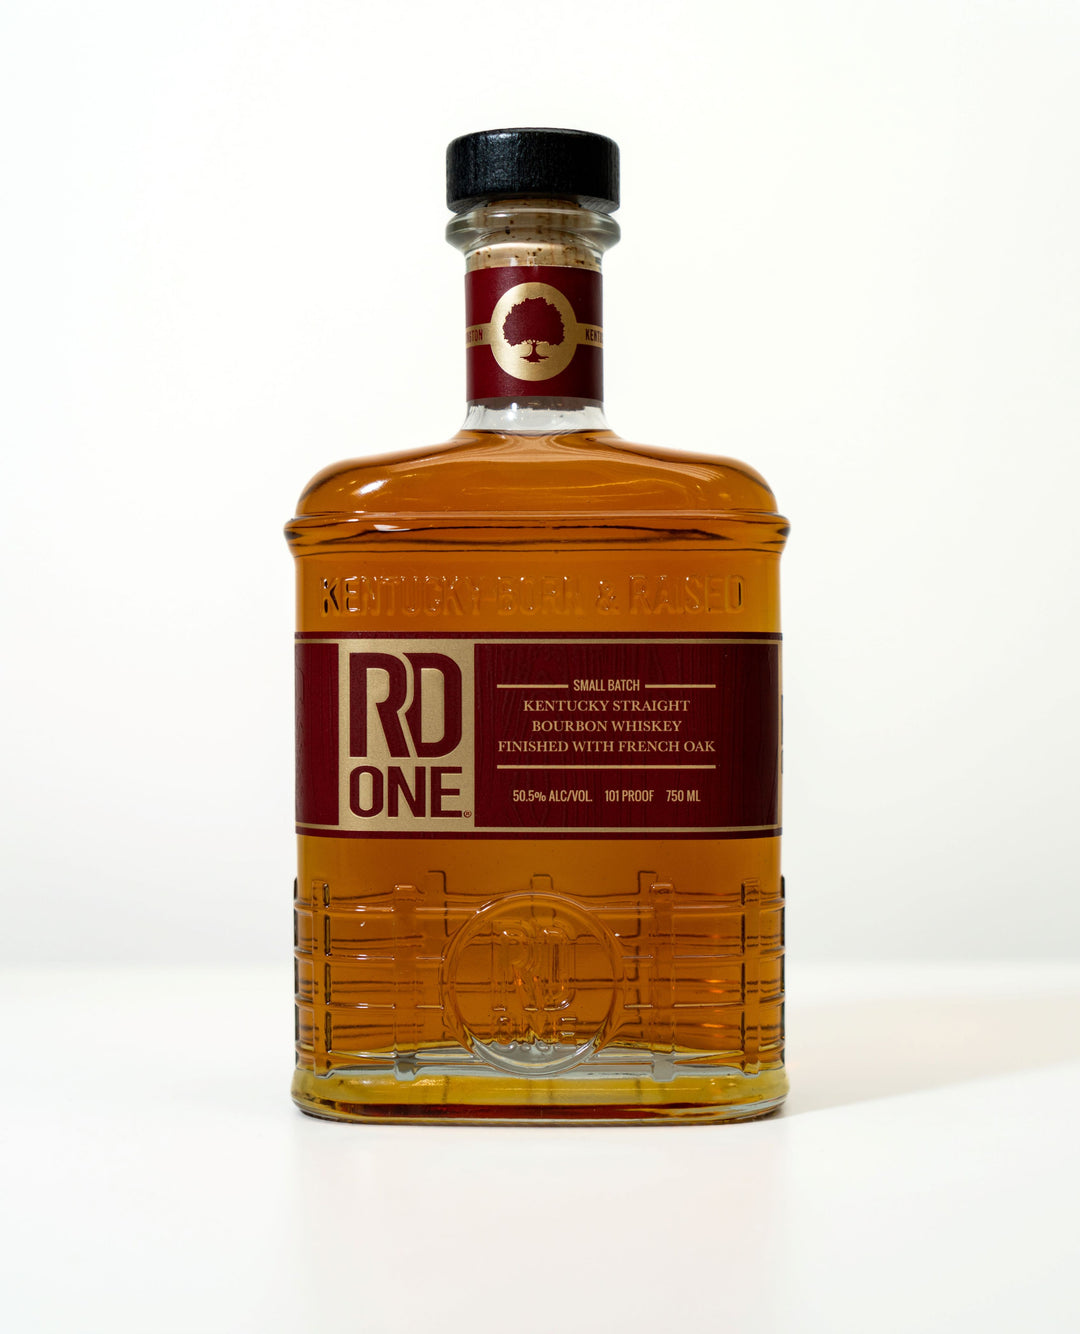 RD One Kentucky Straight Bourbon Whiskey 101 Proof